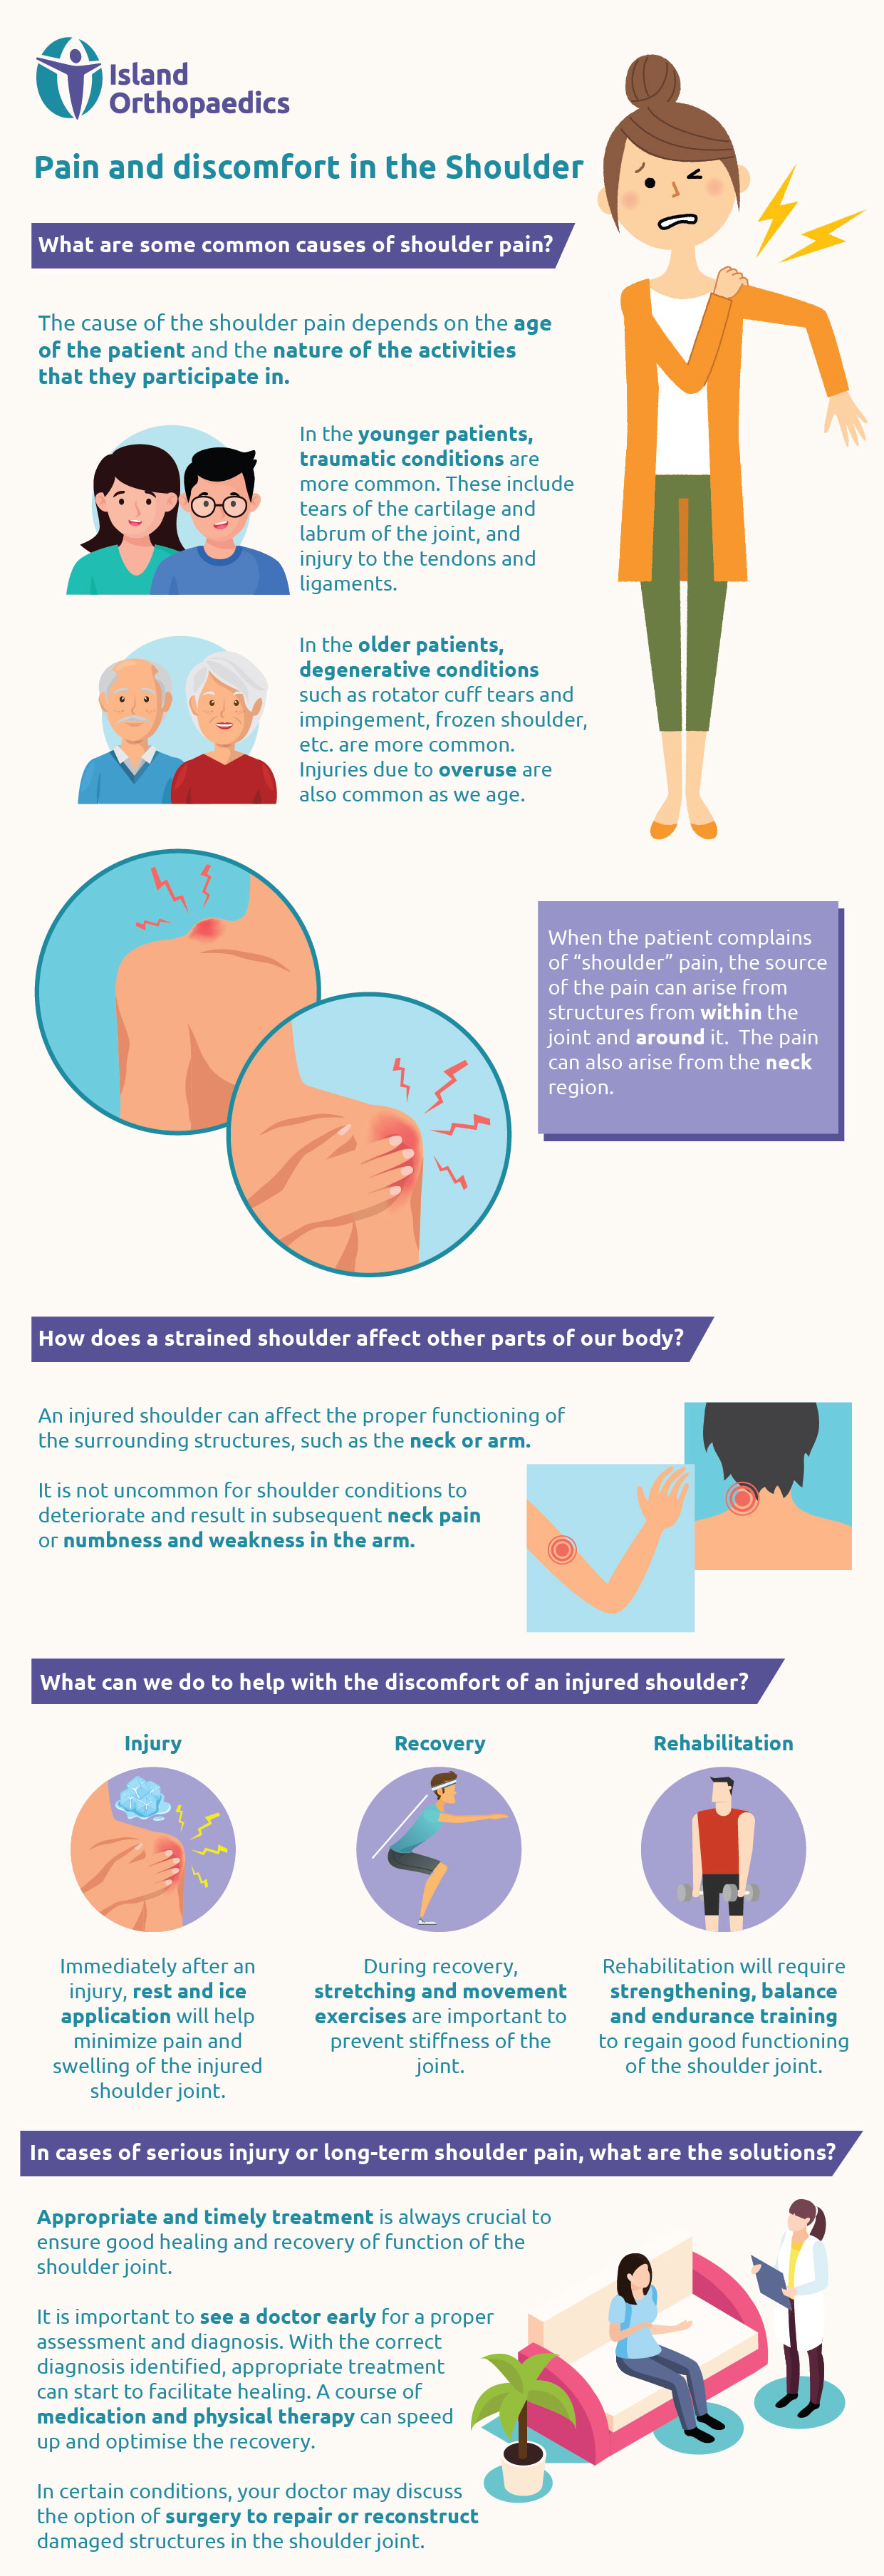 infographic of pain and discomfort in the shoulder and how to handle it